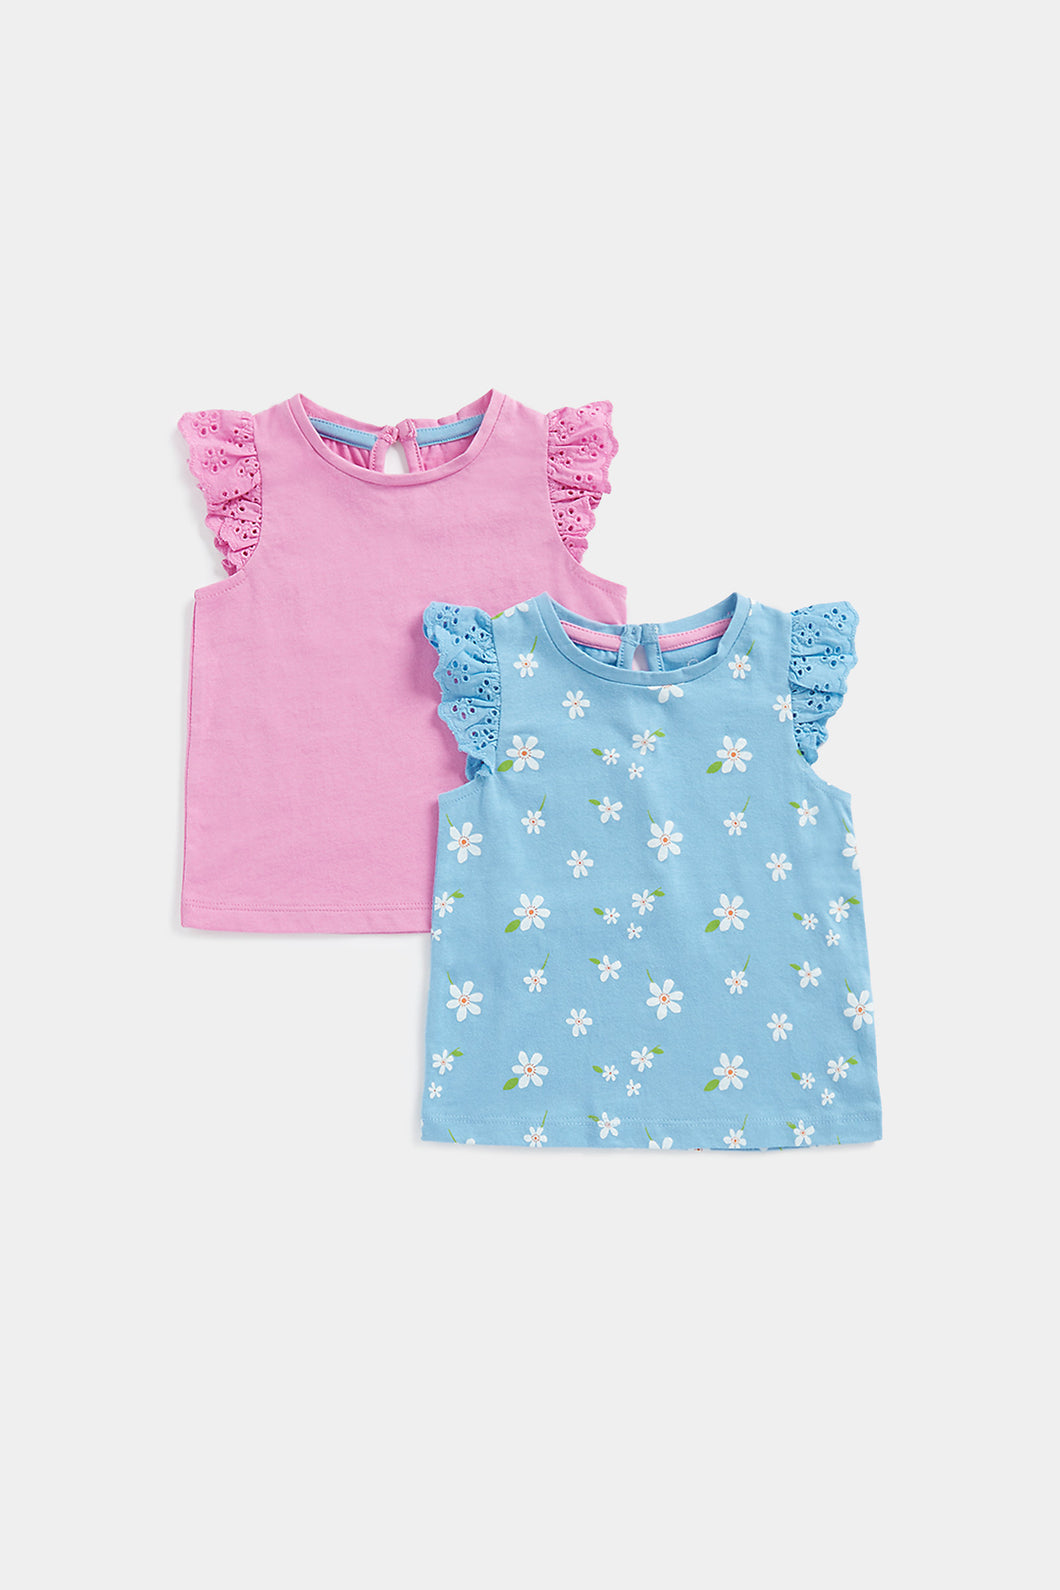 Mothercare Sleeveless T-Shirts - 2 pack